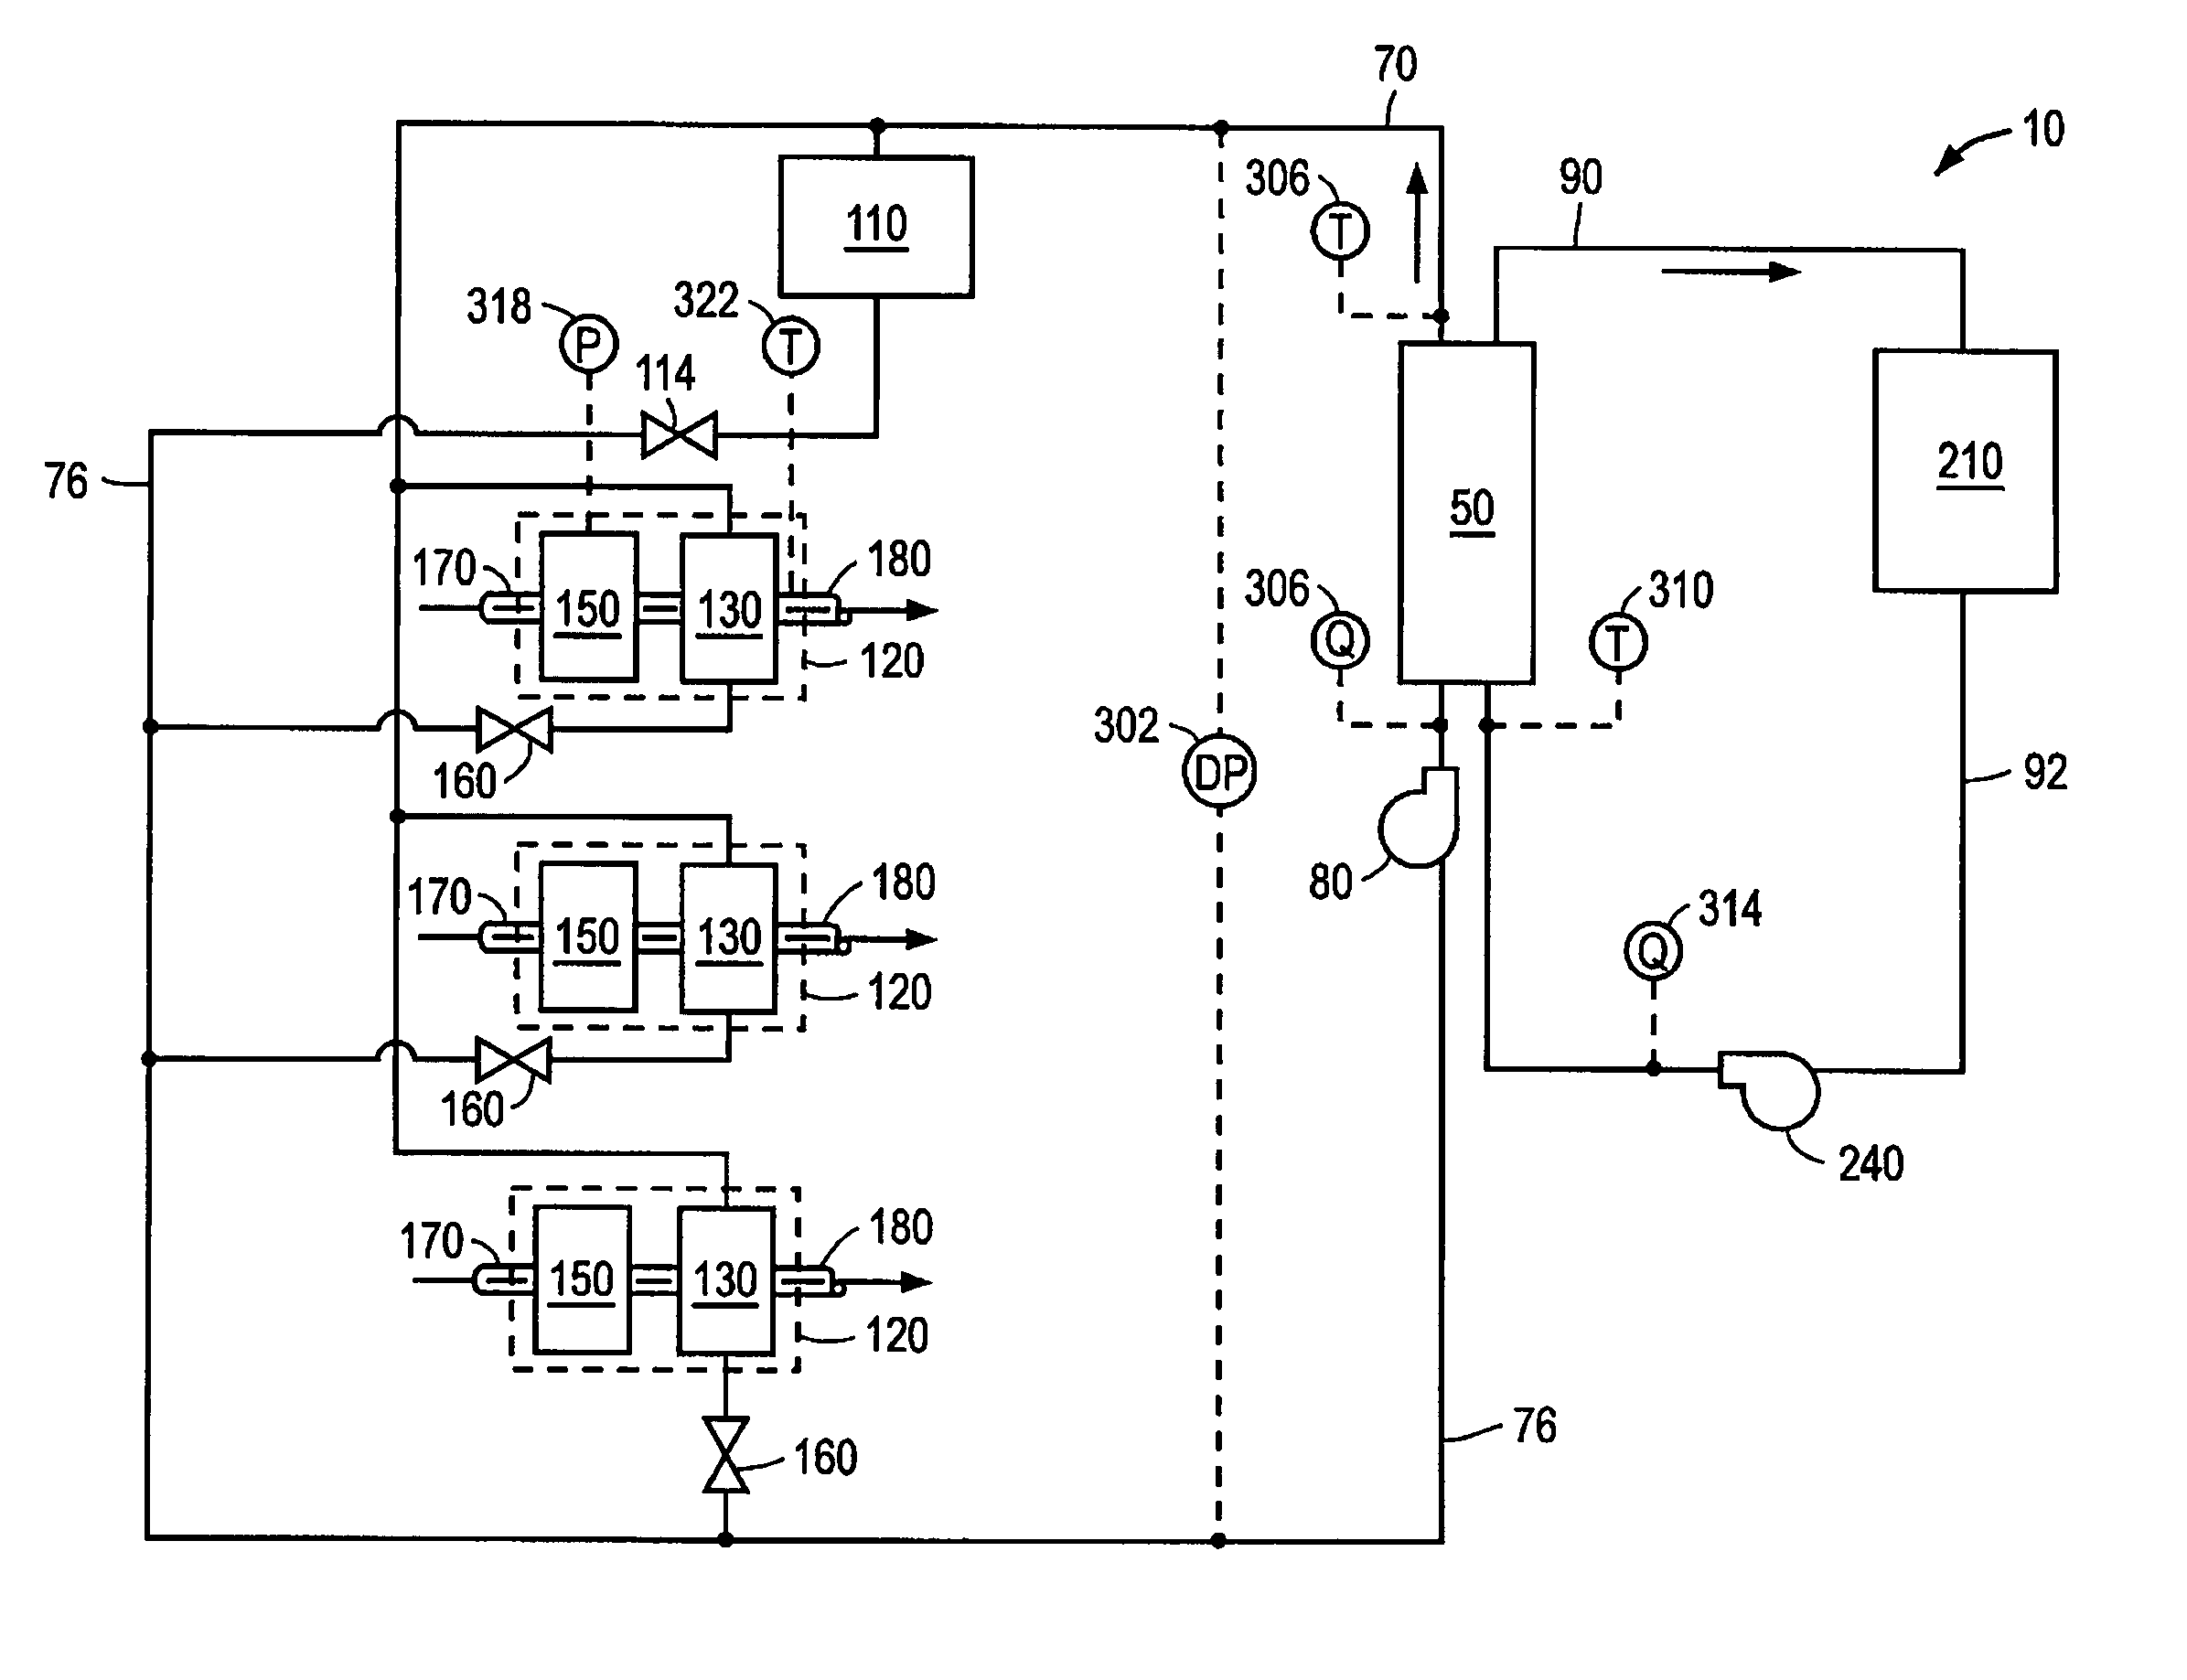 Optimized control system for cooling systems